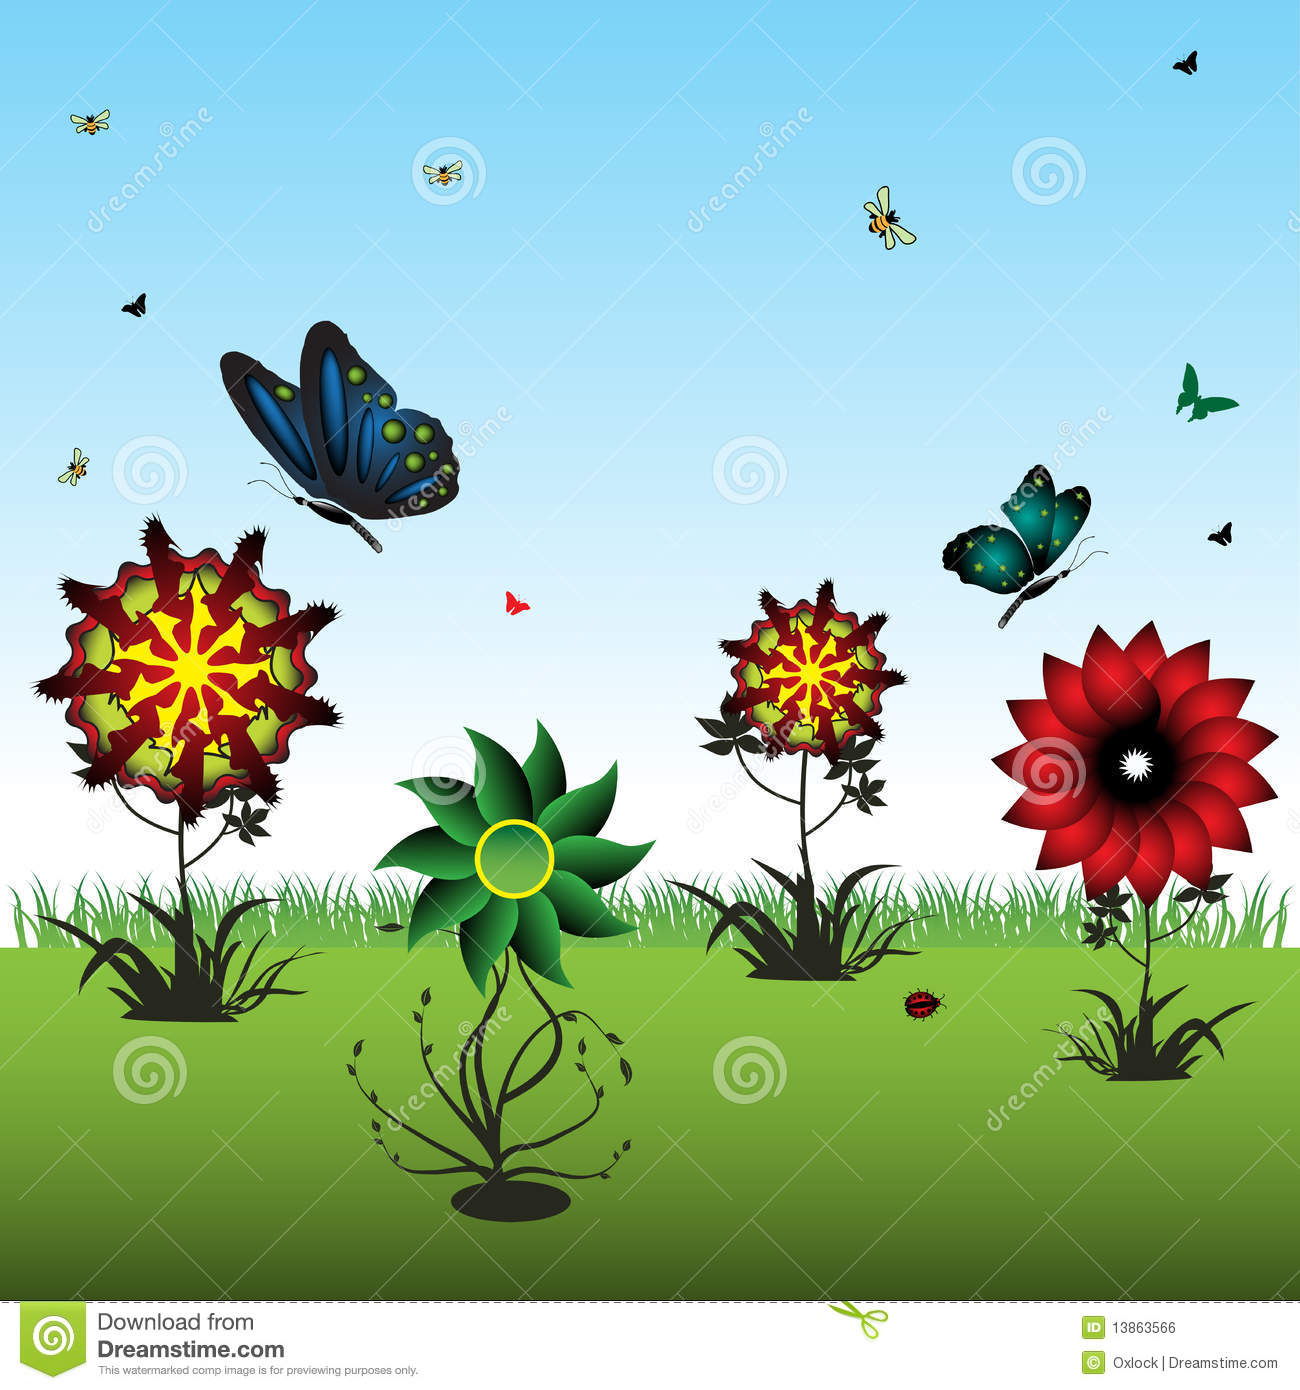 Field With Various Flowers Royalty Free Stock Image   Image  13863566